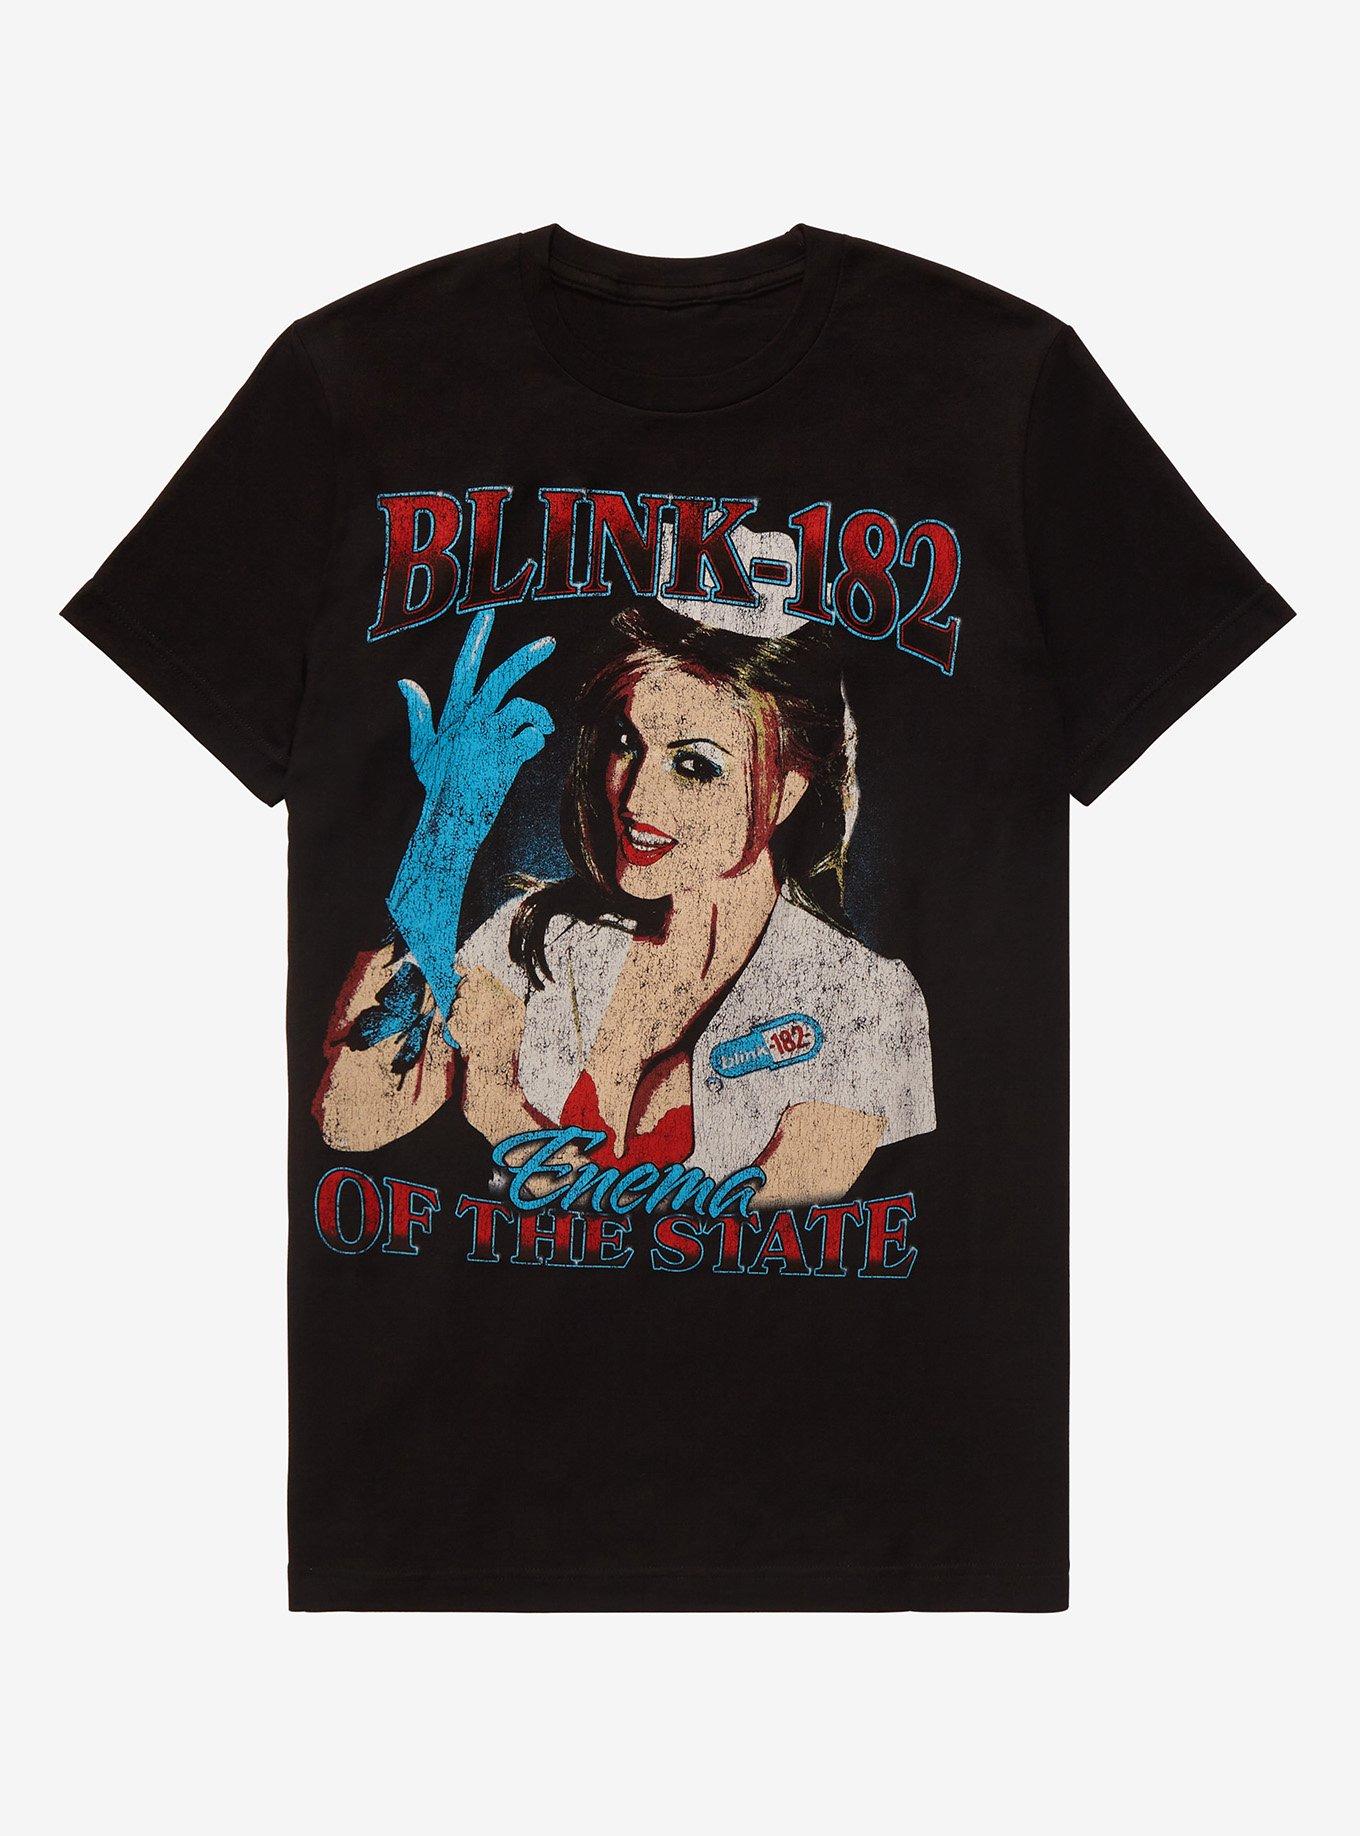 Blink-182 Enema Of The State T-Shirt